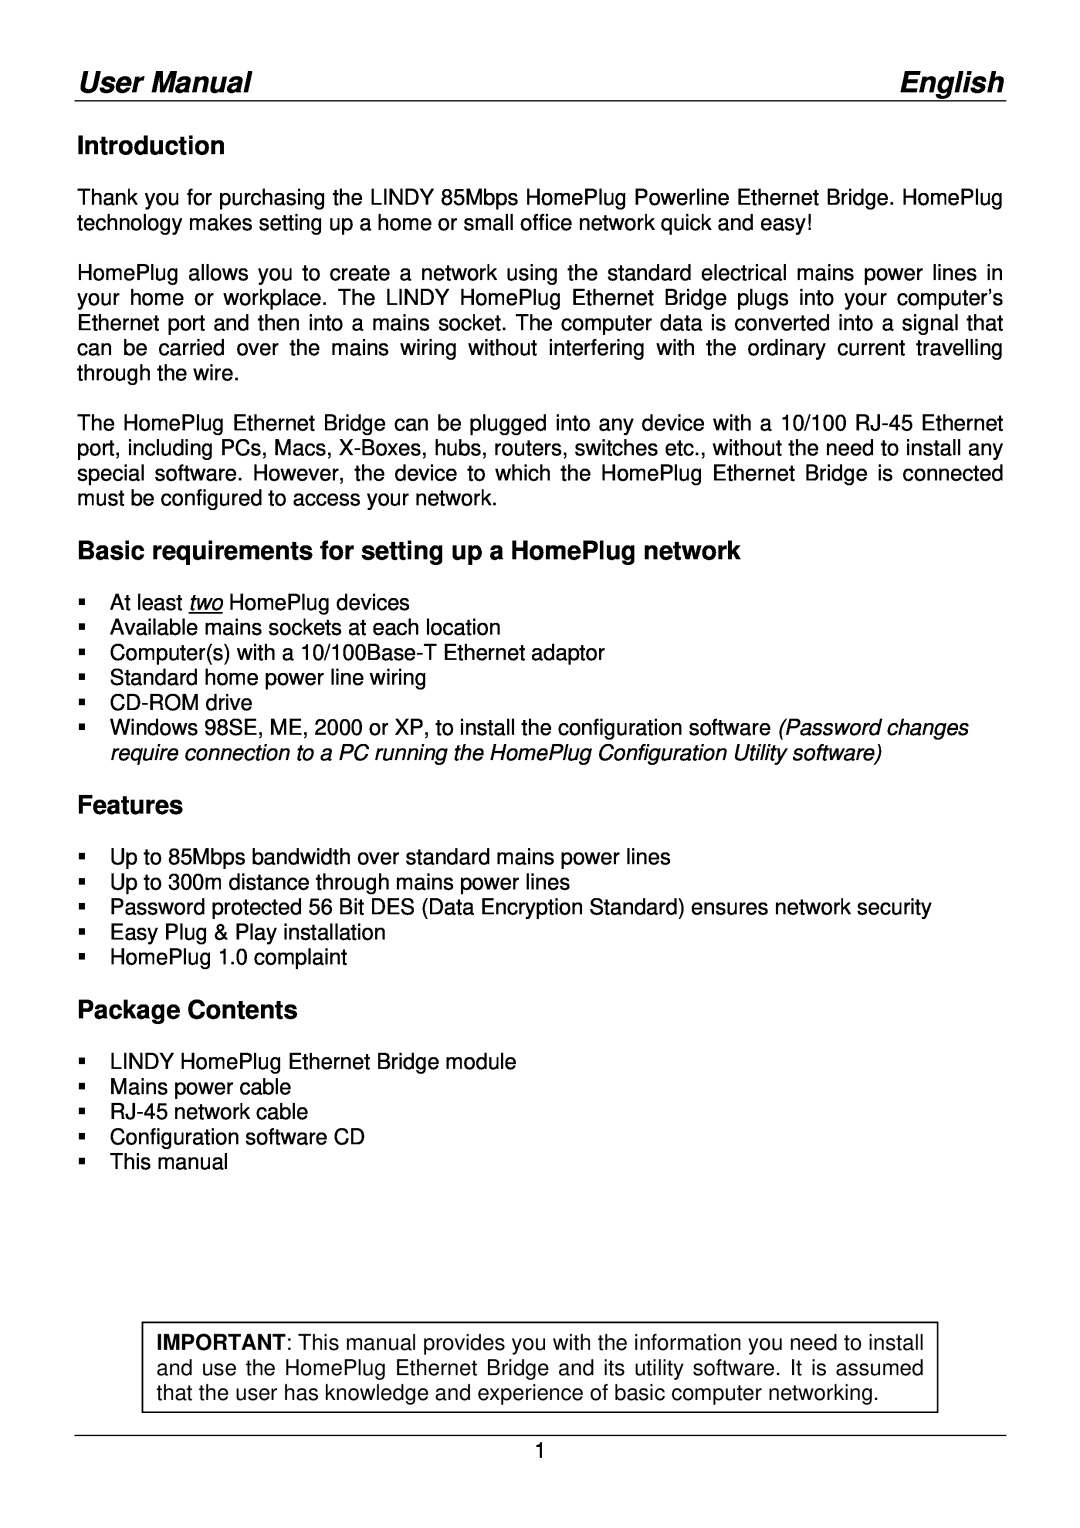 Lindy 25130 user manual User Manual, English, Introduction, Basic requirements for setting up a HomePlug network, Features 